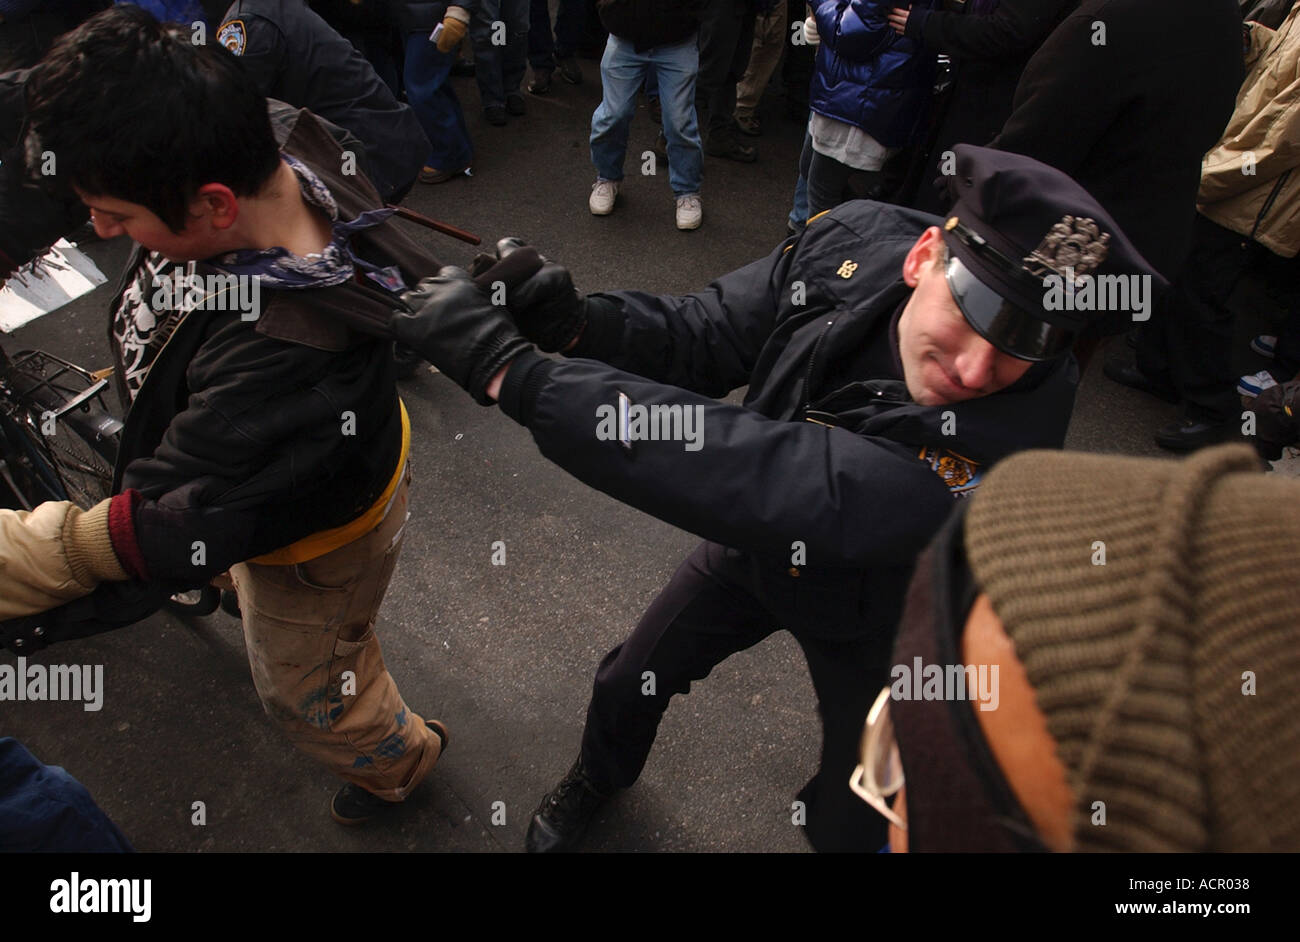 Police officer arresting protester during anti war protests in New York City Stock Photo